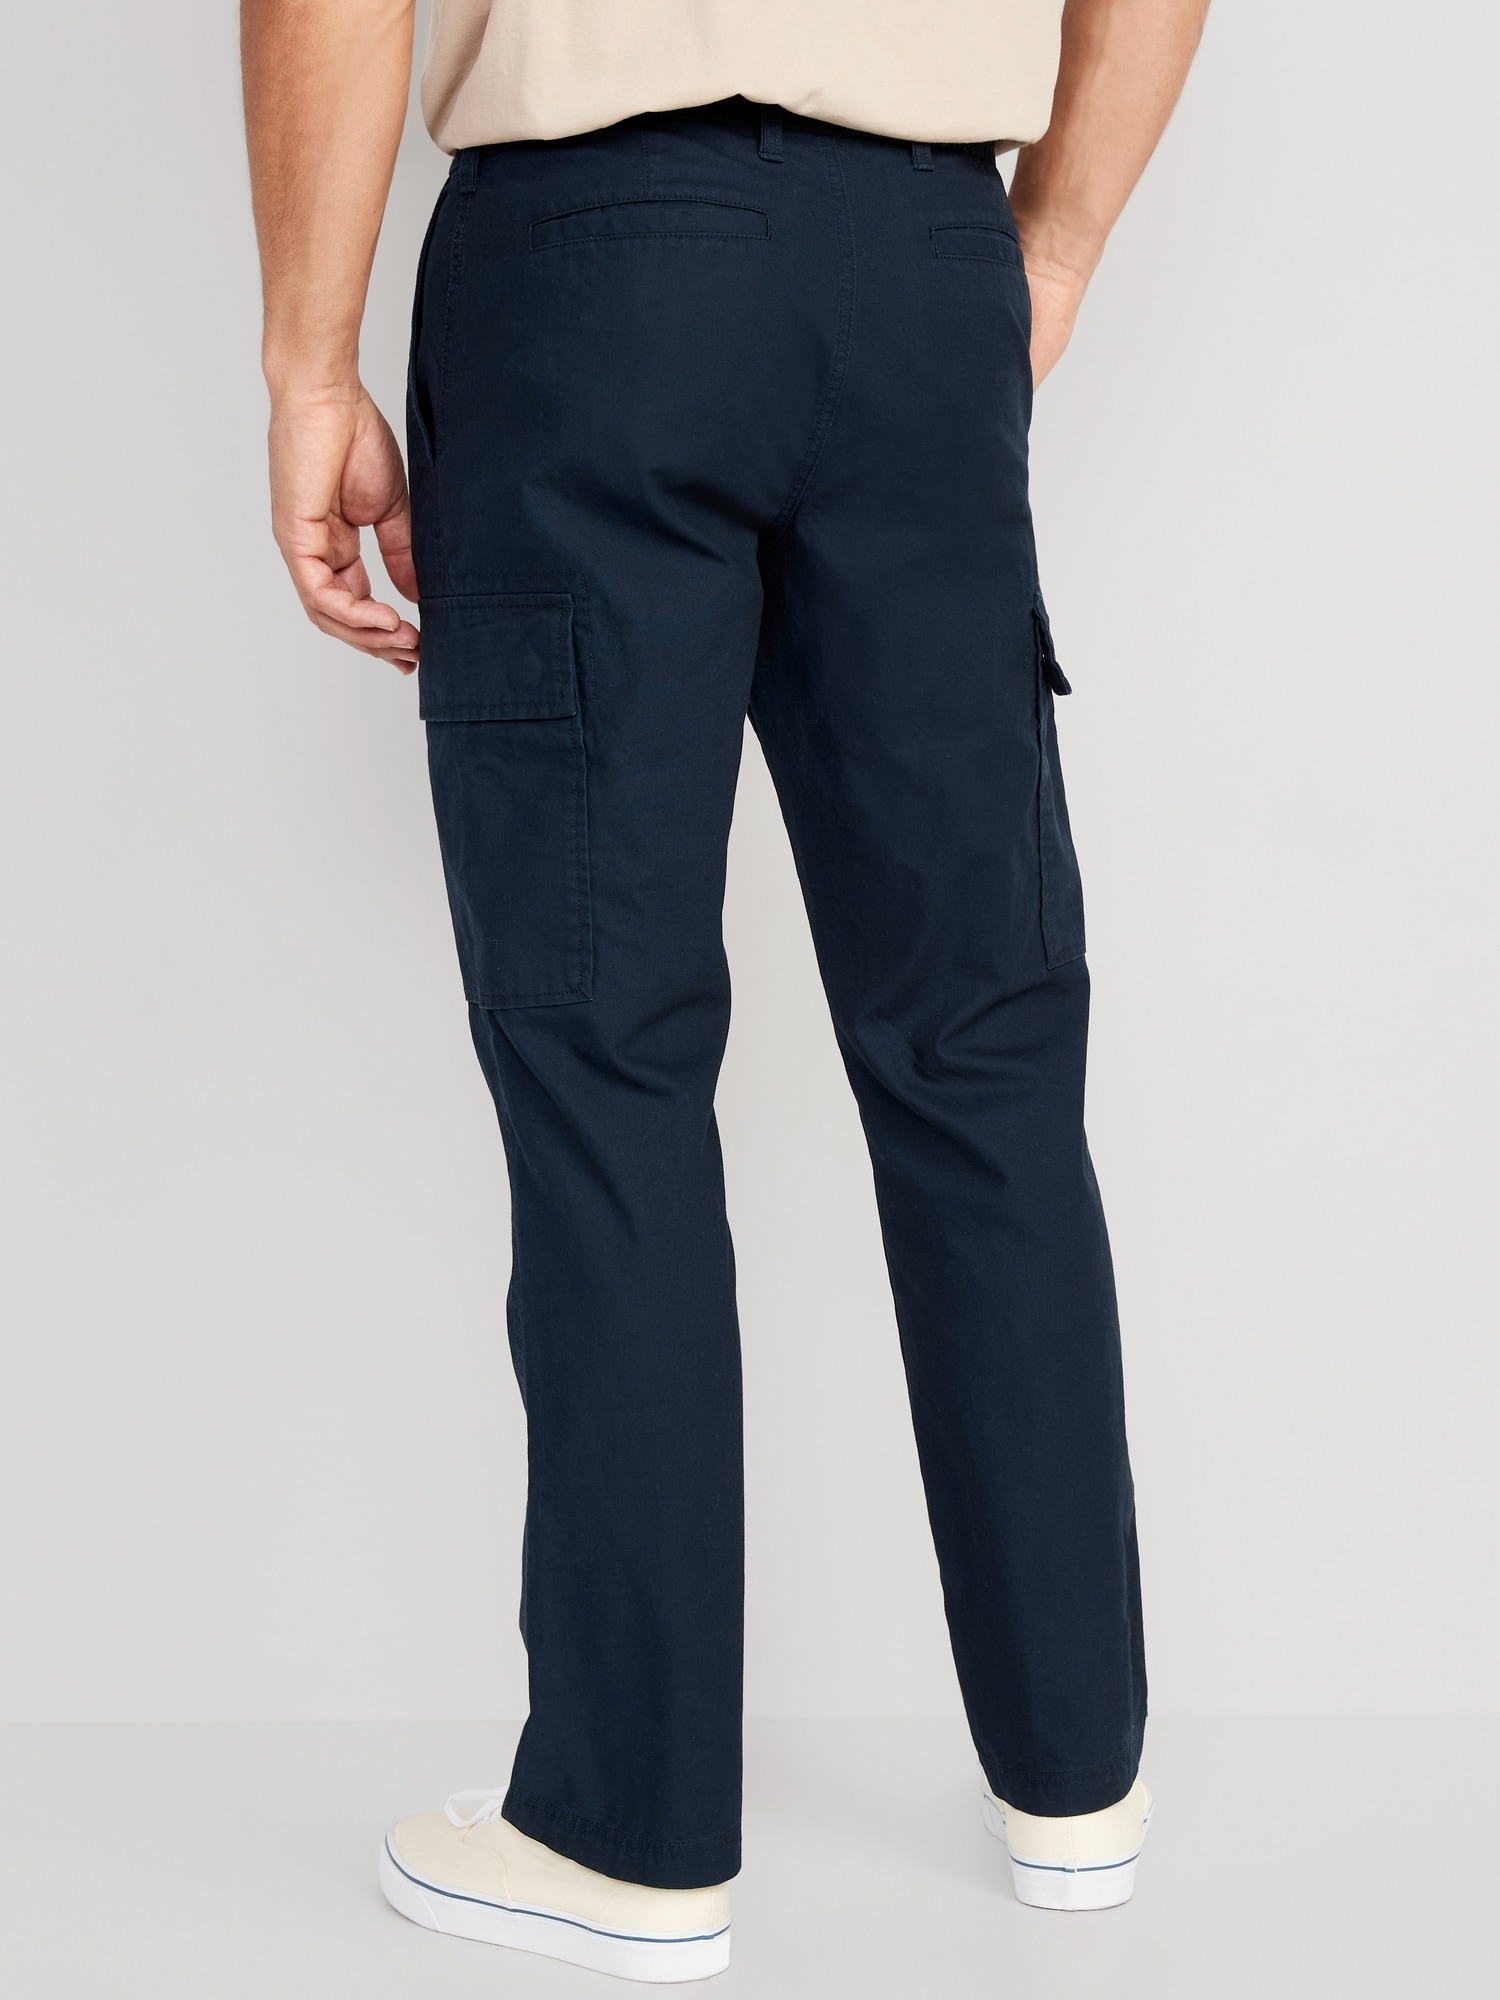 The Best Types Of Pants For Men's Casual Style - Bewakoof Blog